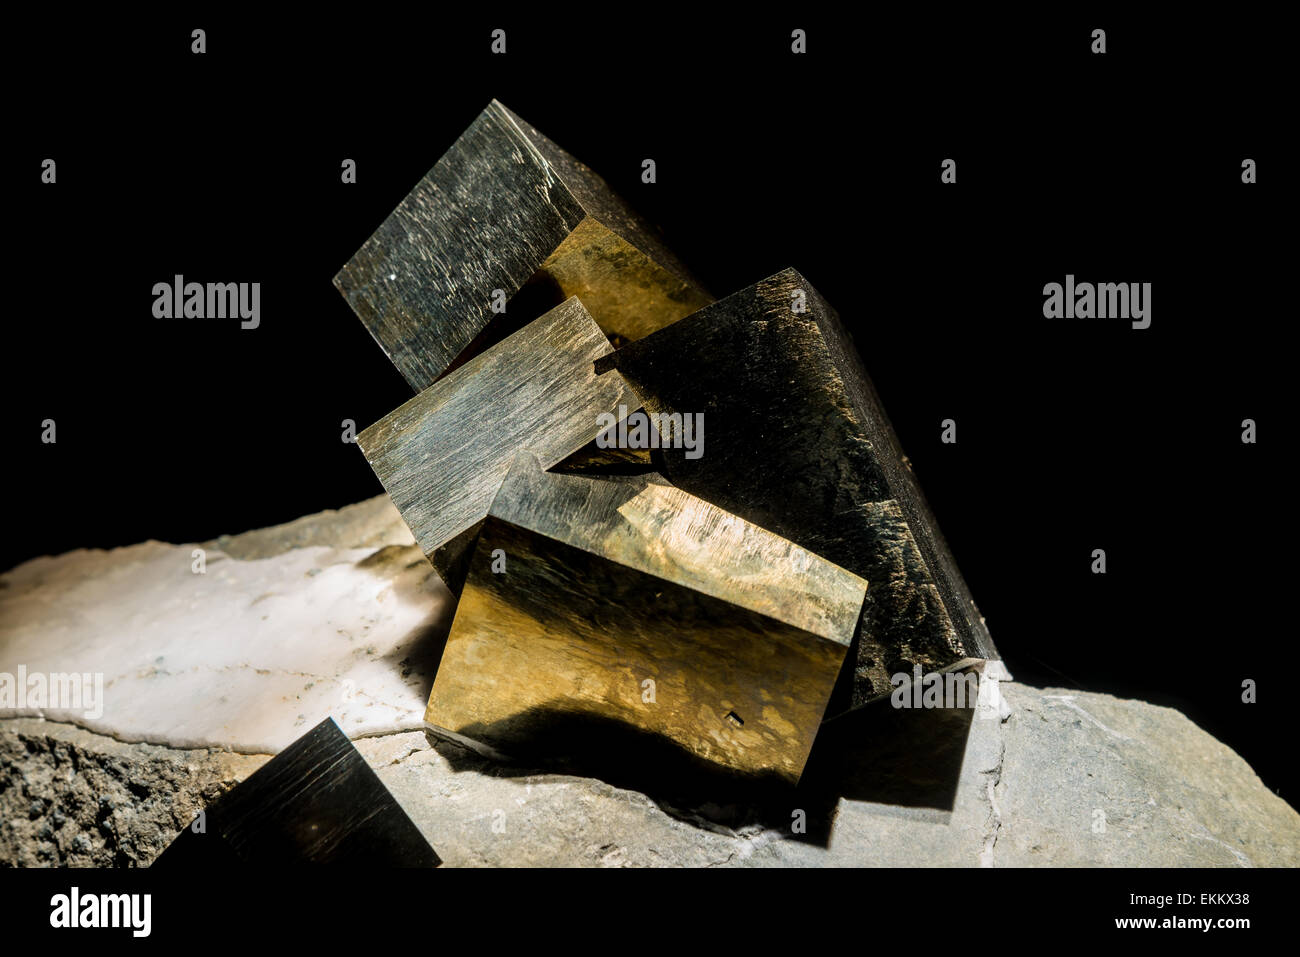 Cubic shaped mineral pyrite, iron sulfide, FeS2. Stock Photo